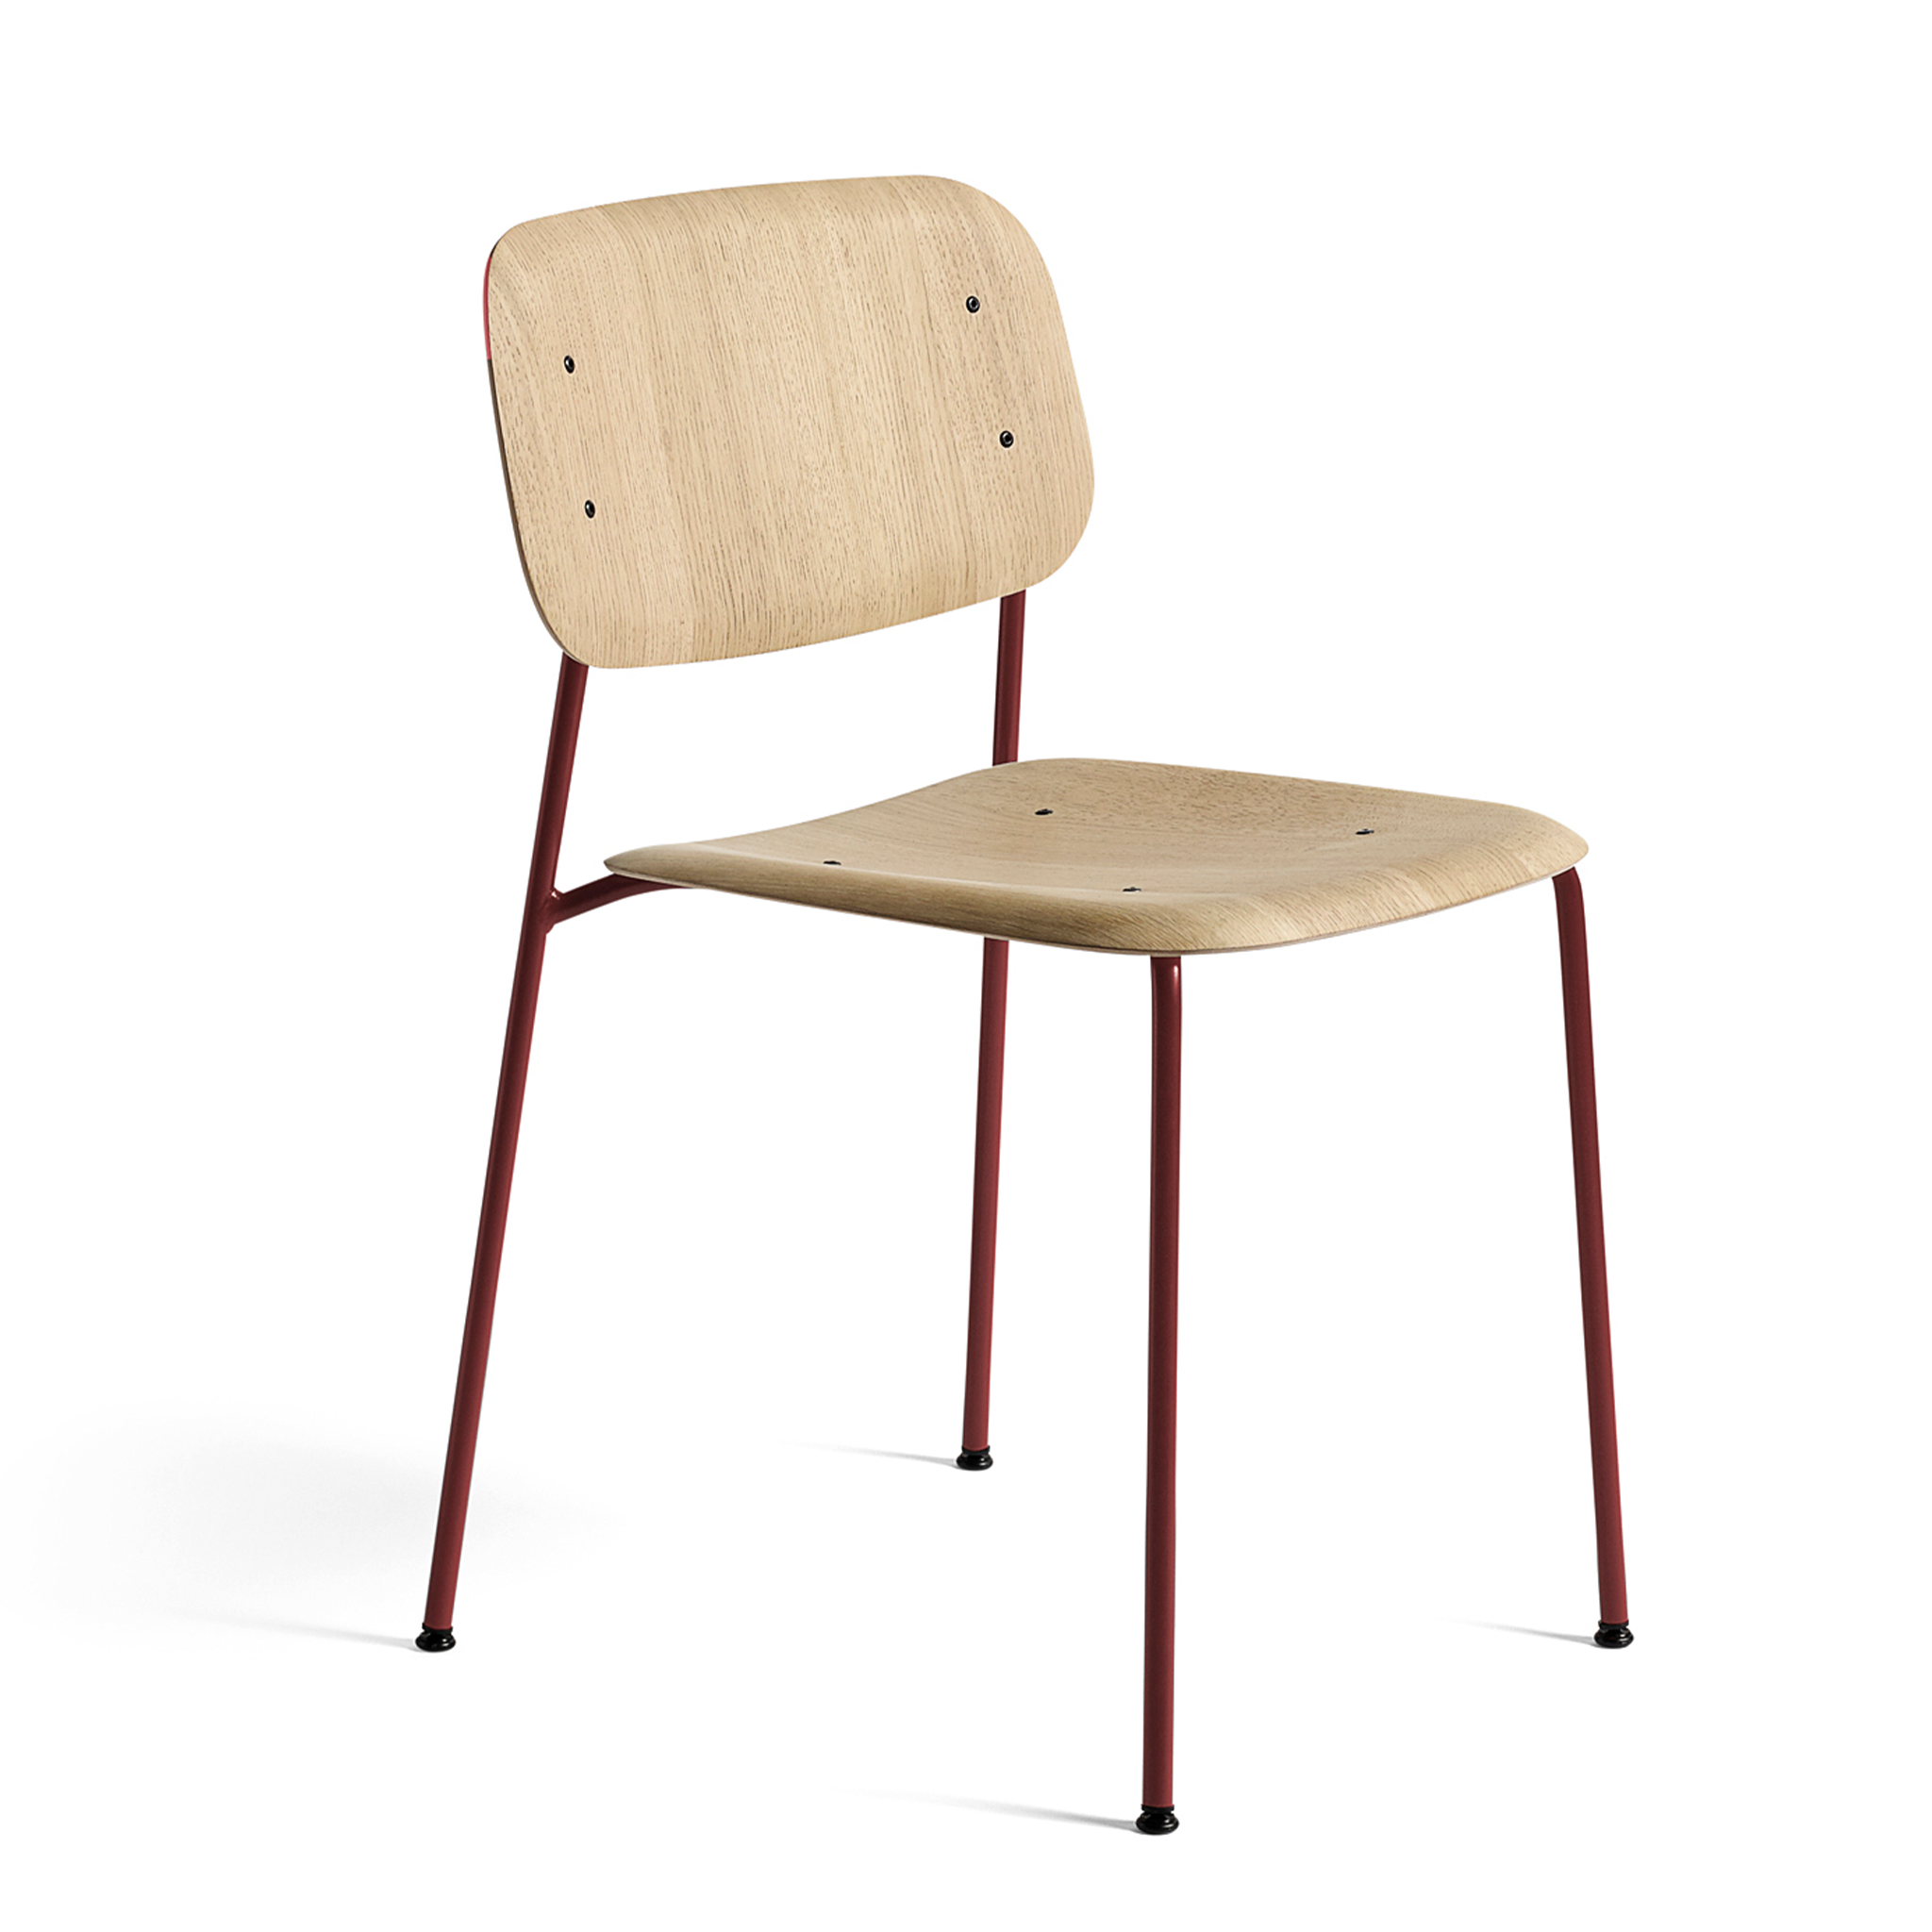 Soft Edge 40 Chair by HAY